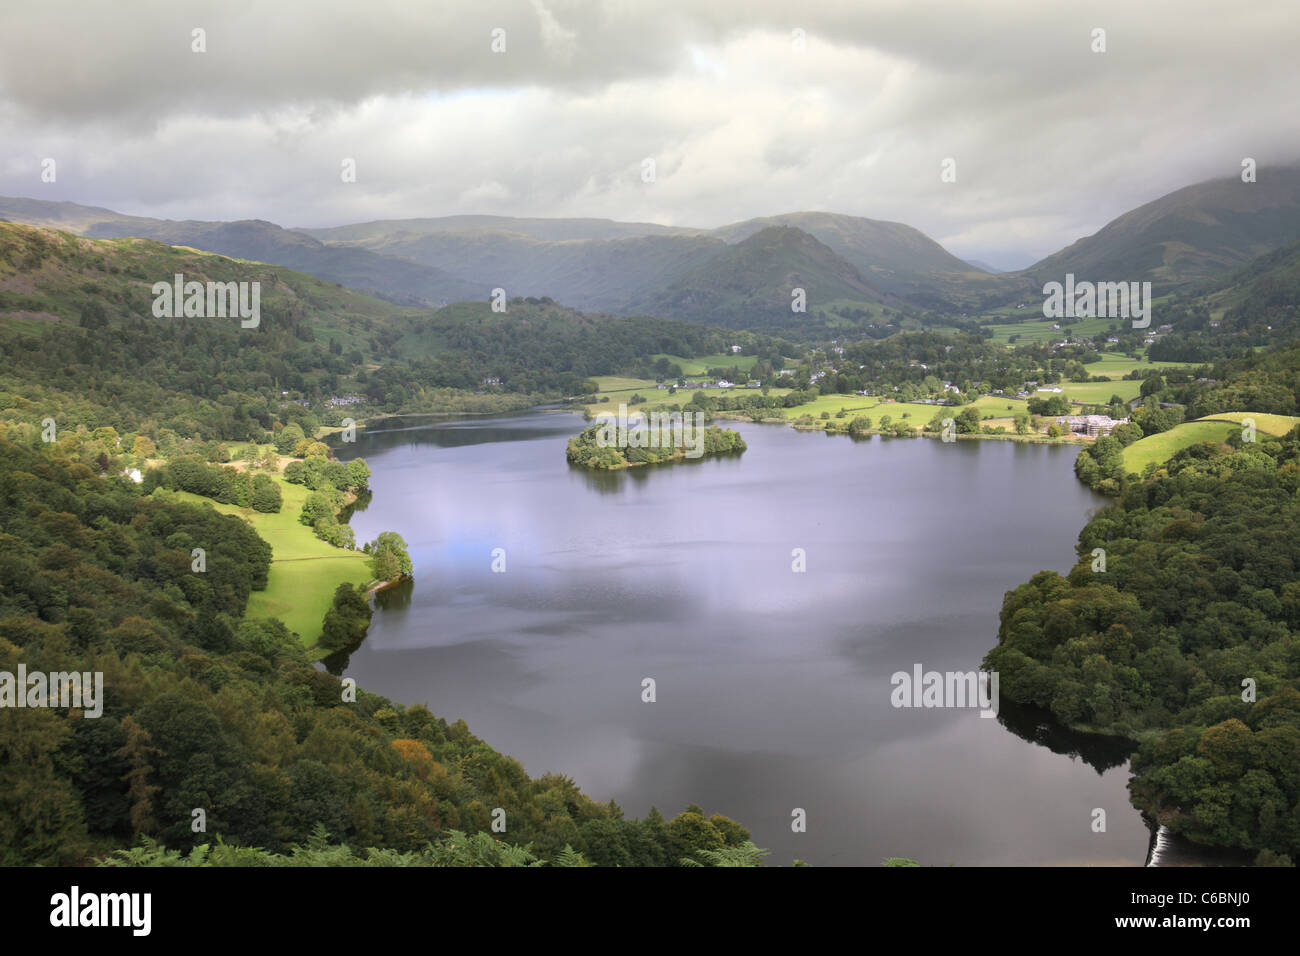 Grasmere lake seen from Loughrigg Fell, English Lake District, Cumbria, England, UK Stock Photo